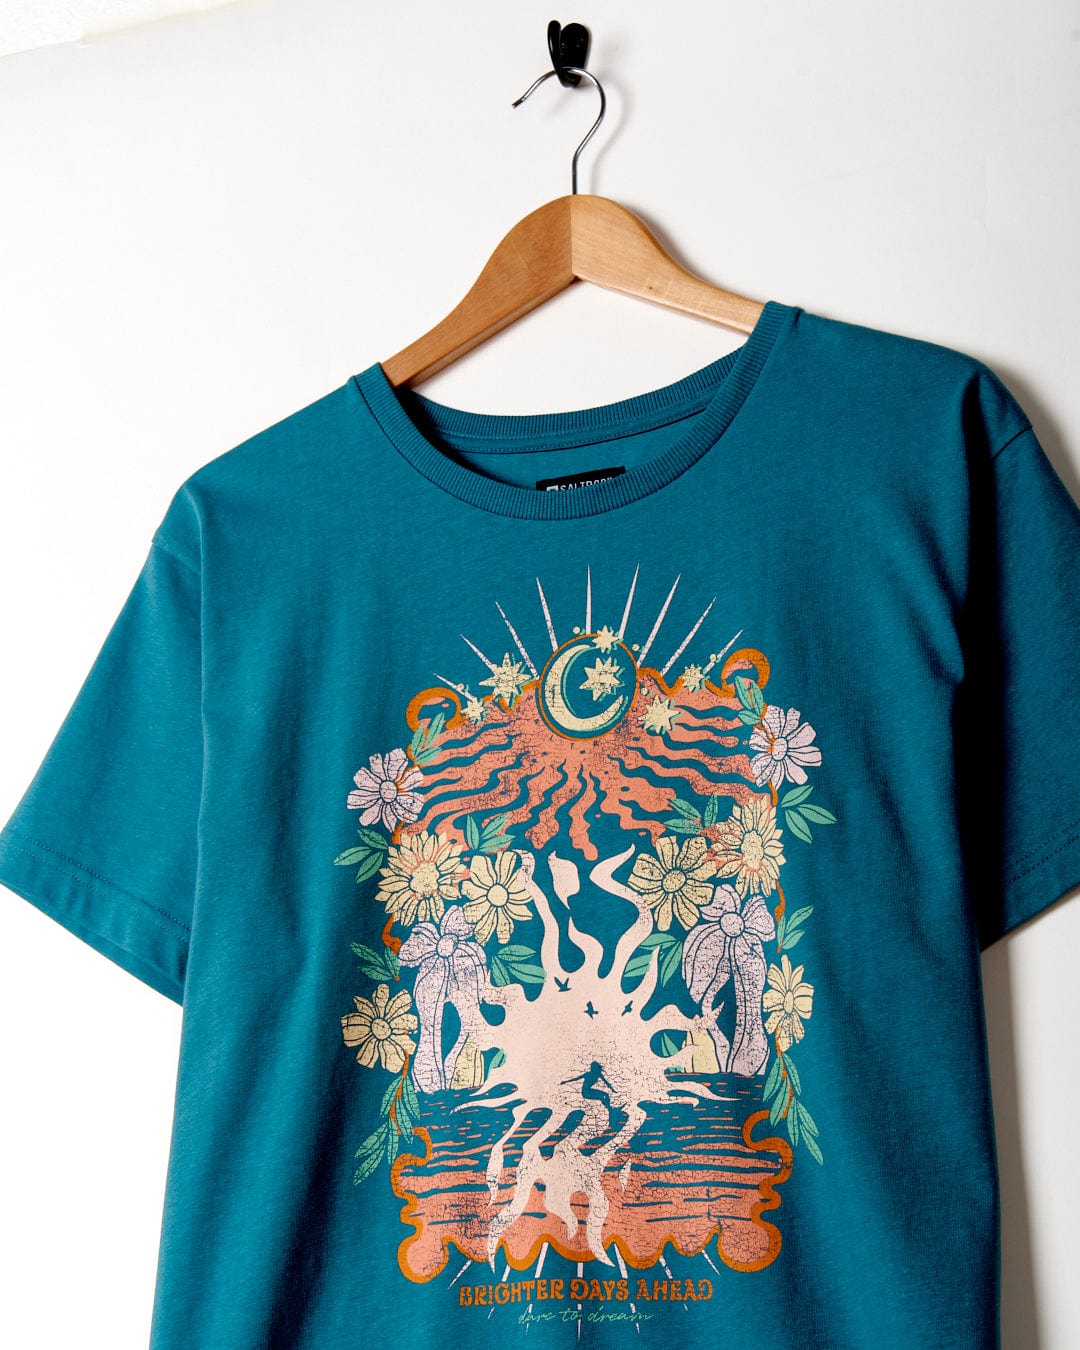 Better Days - Recycled Womens Short Sleeve Relaxed T-Shirt in Teal by Saltrock, hanging on a wall-mounted hook, featuring a sun, moon, and floral design with the text "brighter days ahead.